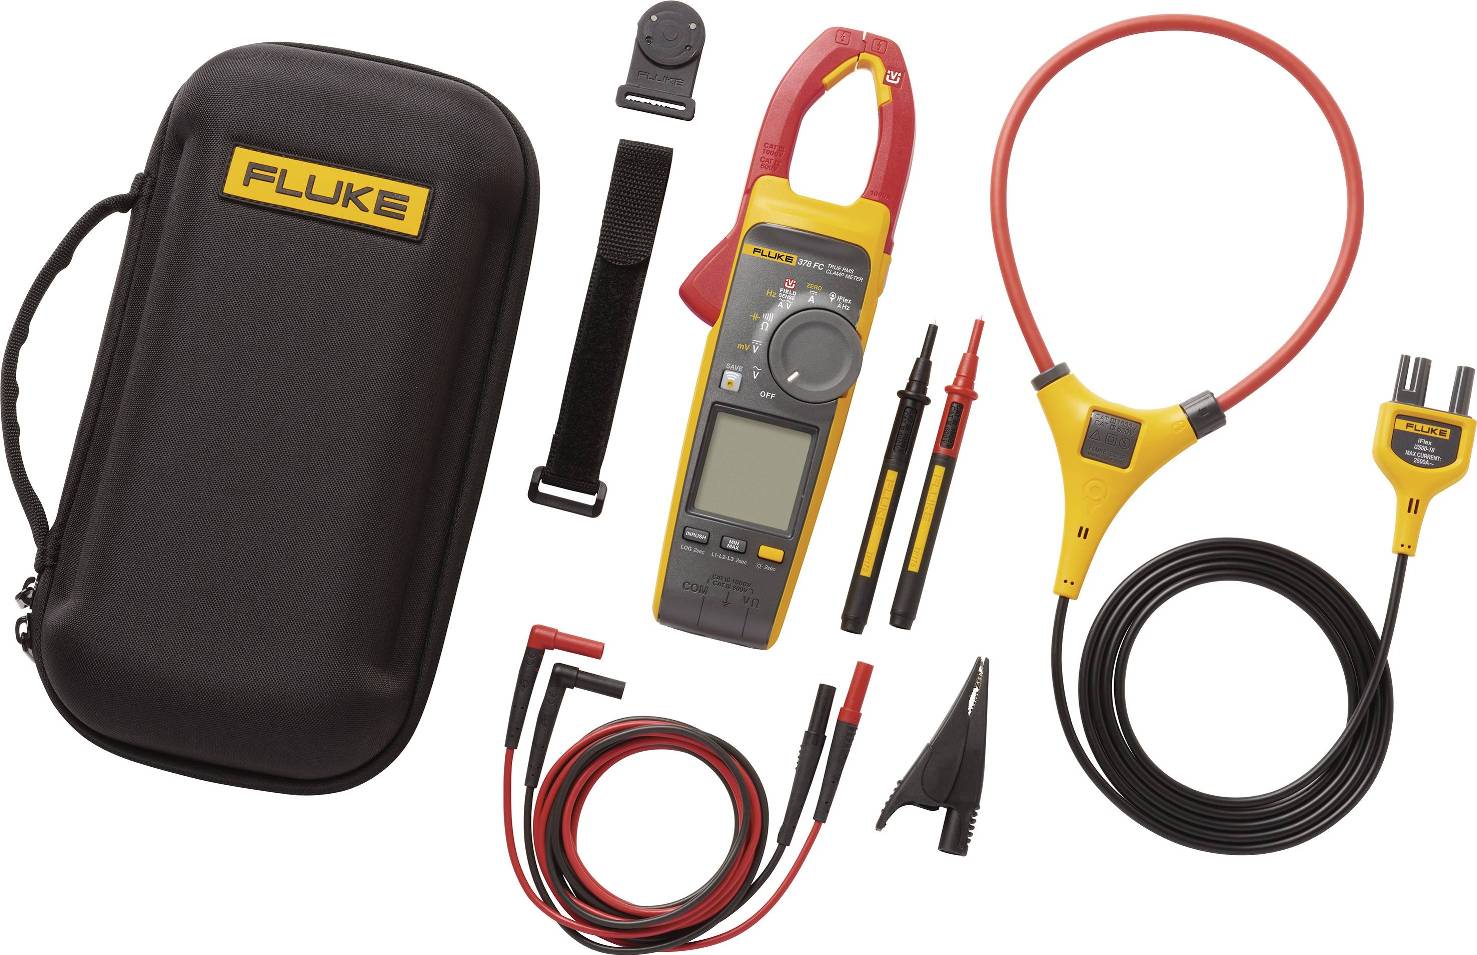 High voltage clamp meters are available with a wide range of accessories